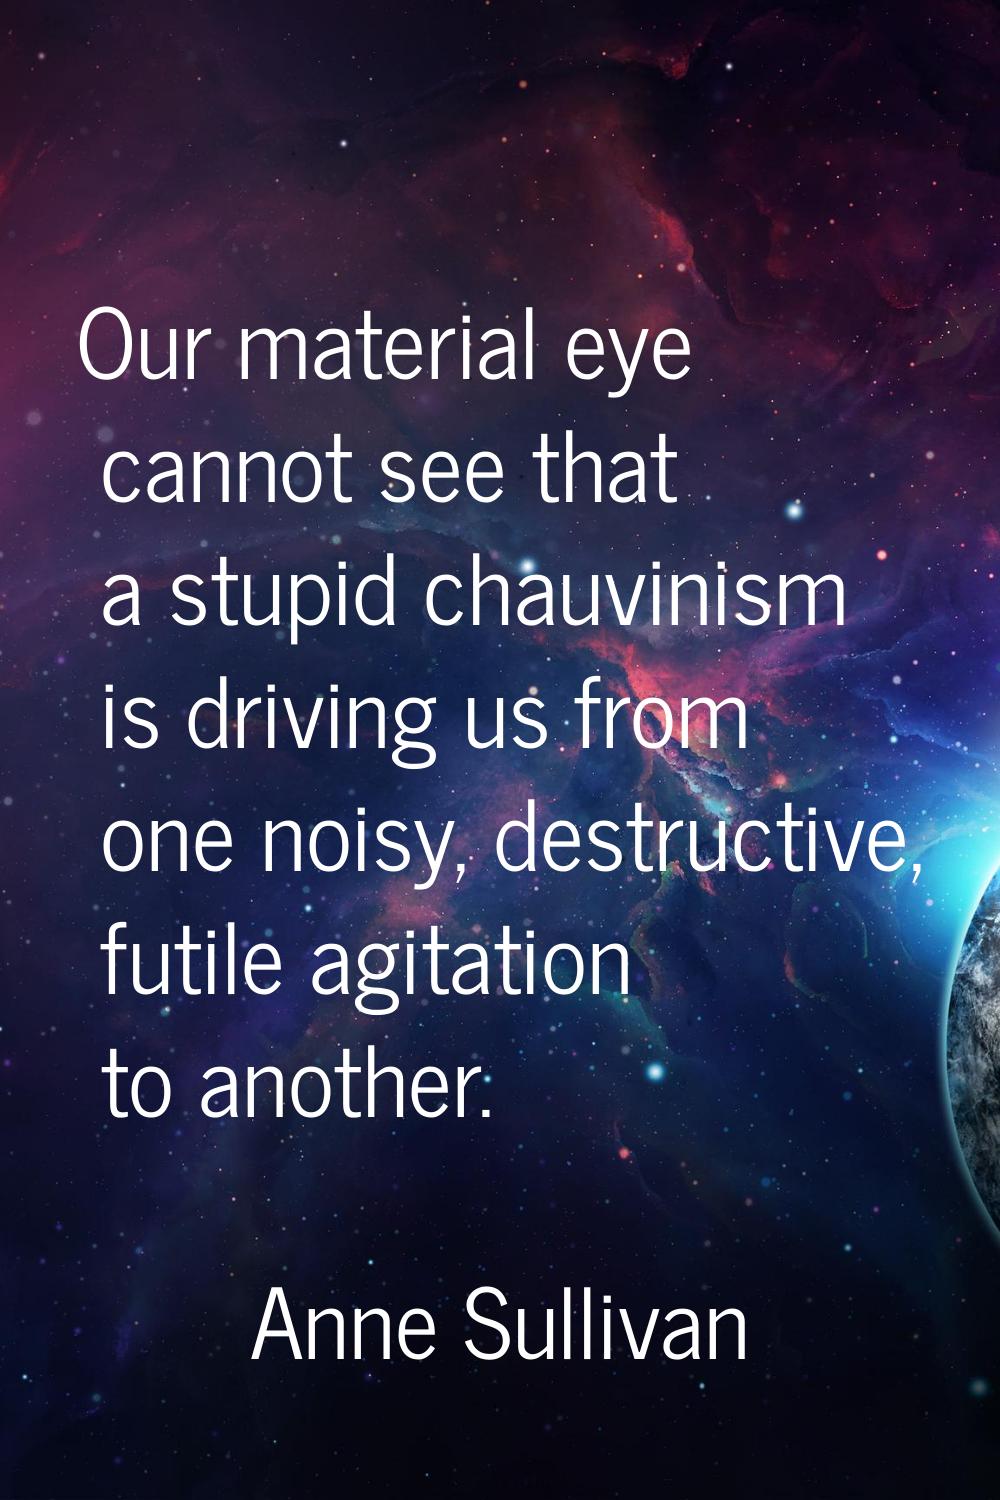 Our material eye cannot see that a stupid chauvinism is driving us from one noisy, destructive, fut